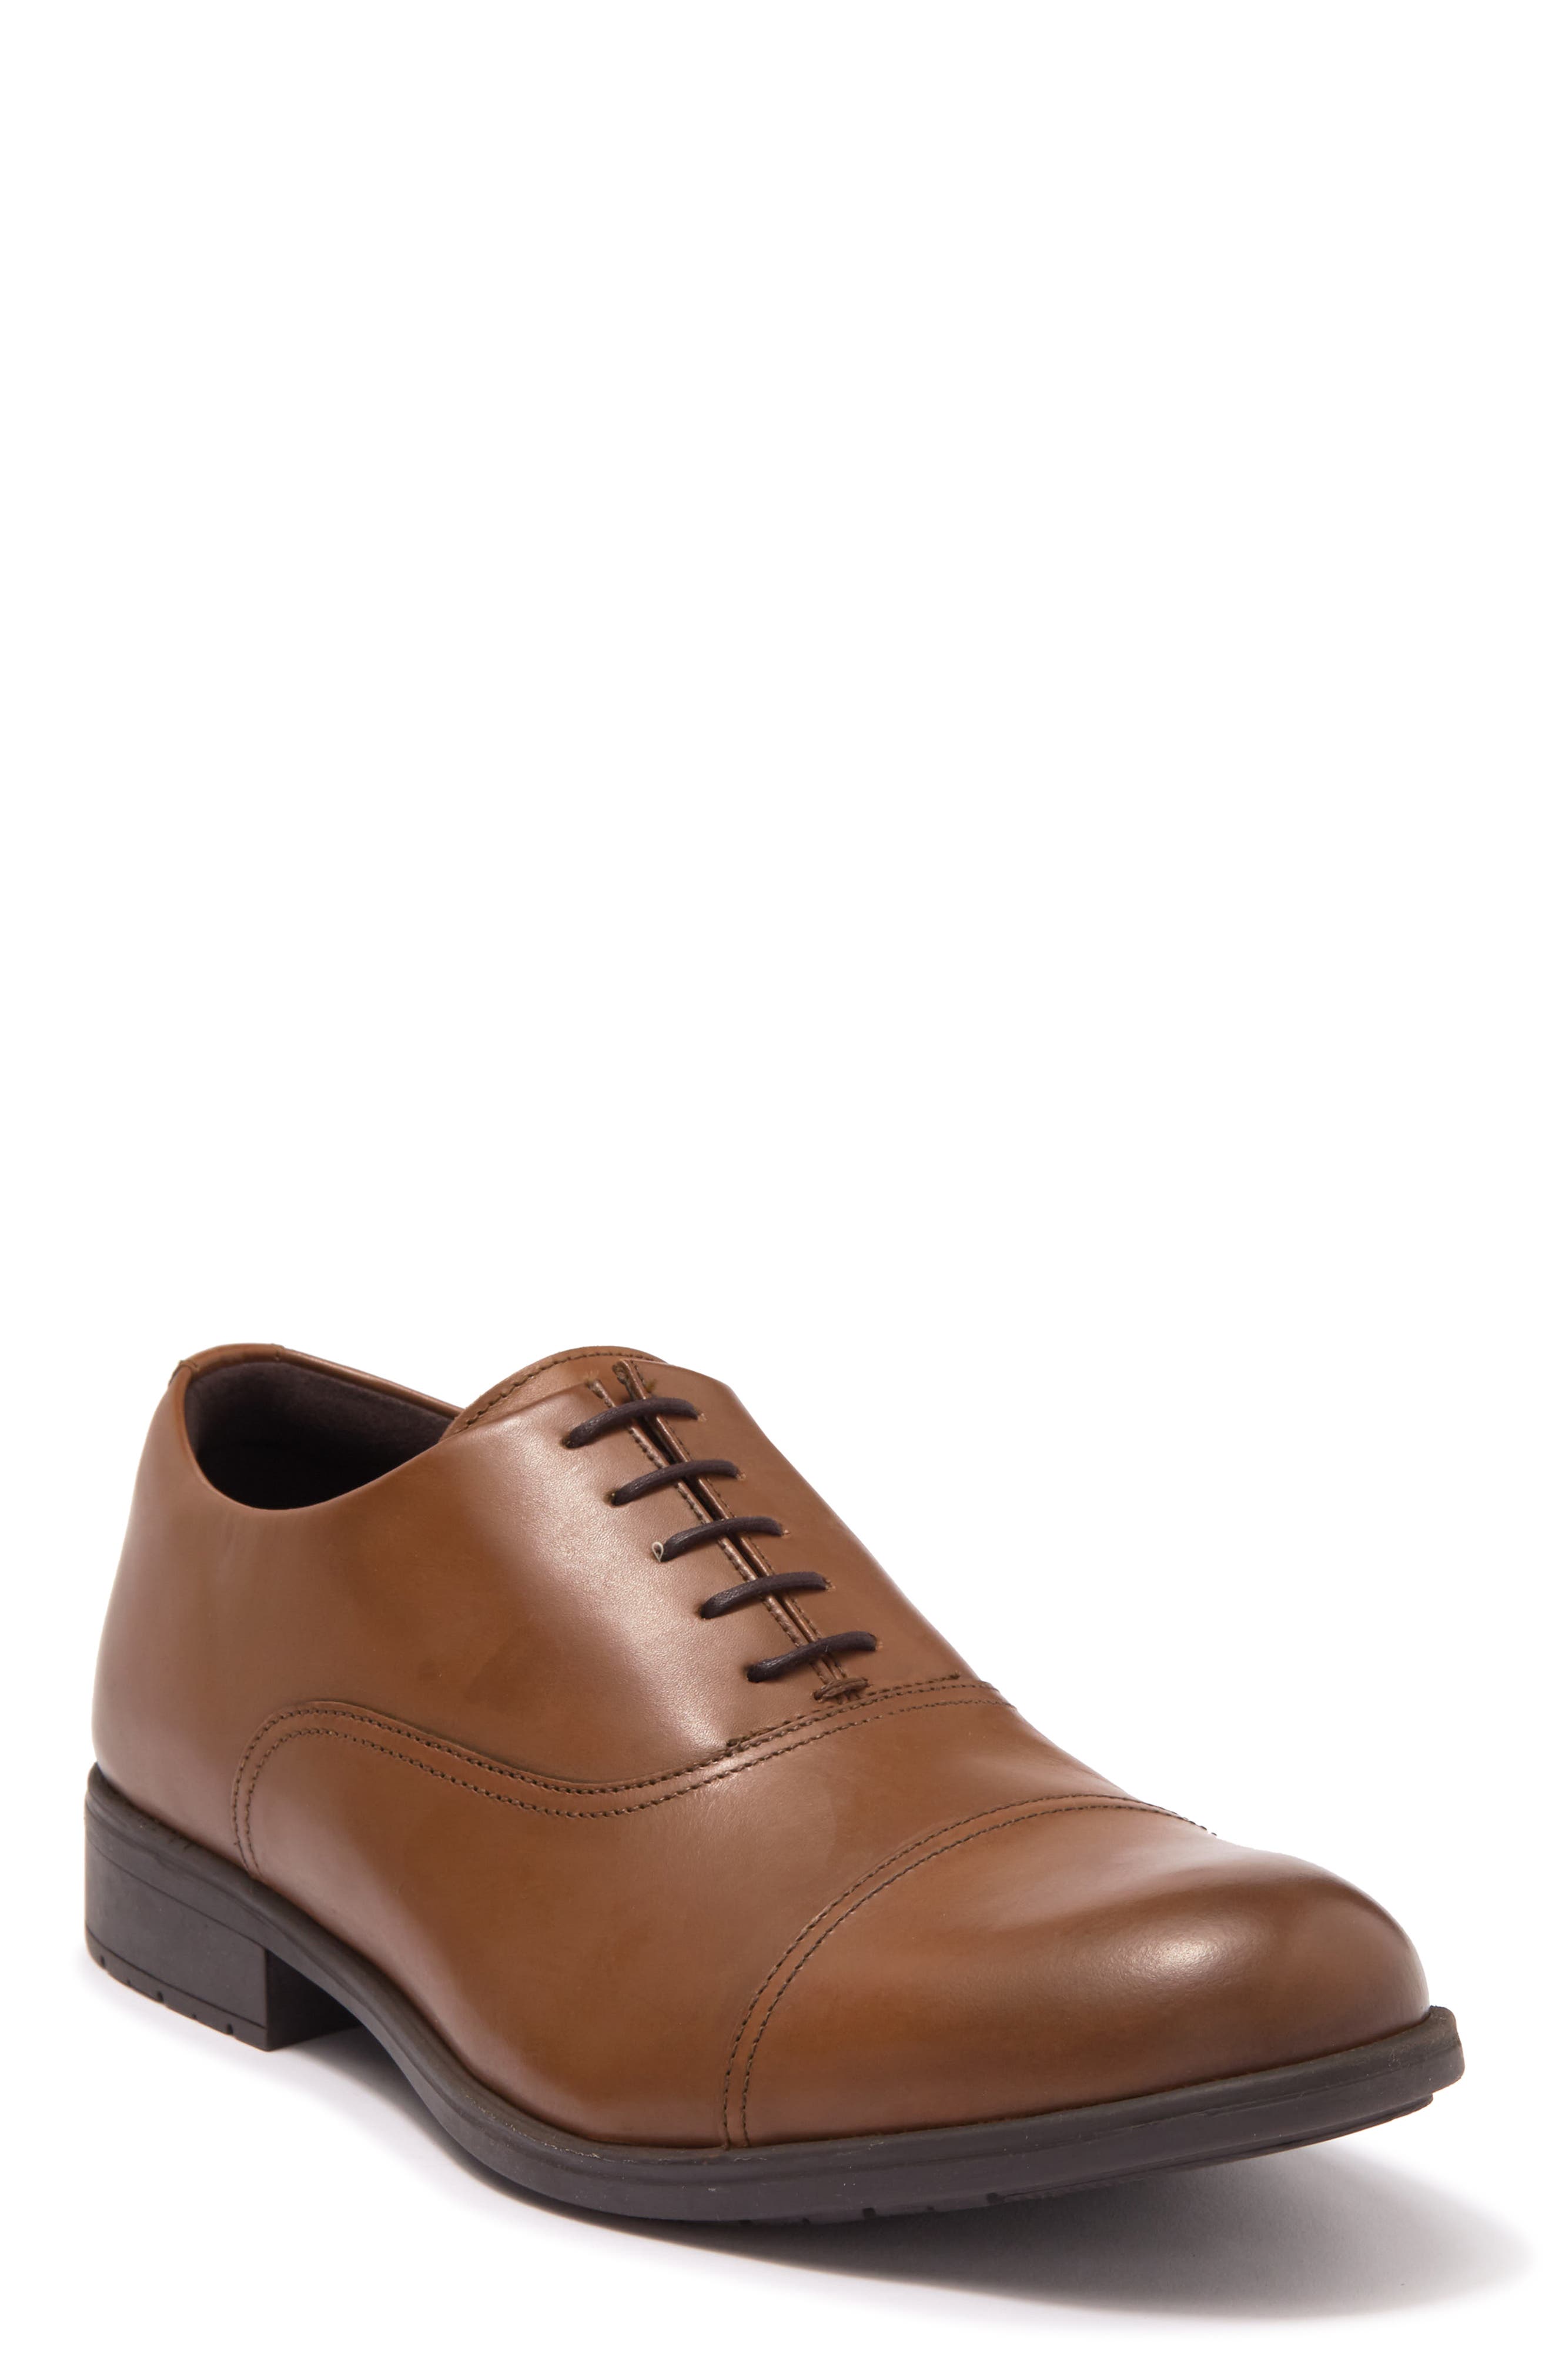 Kenneth Cole Reaction Jasper Lace-up Oxford In Cognac